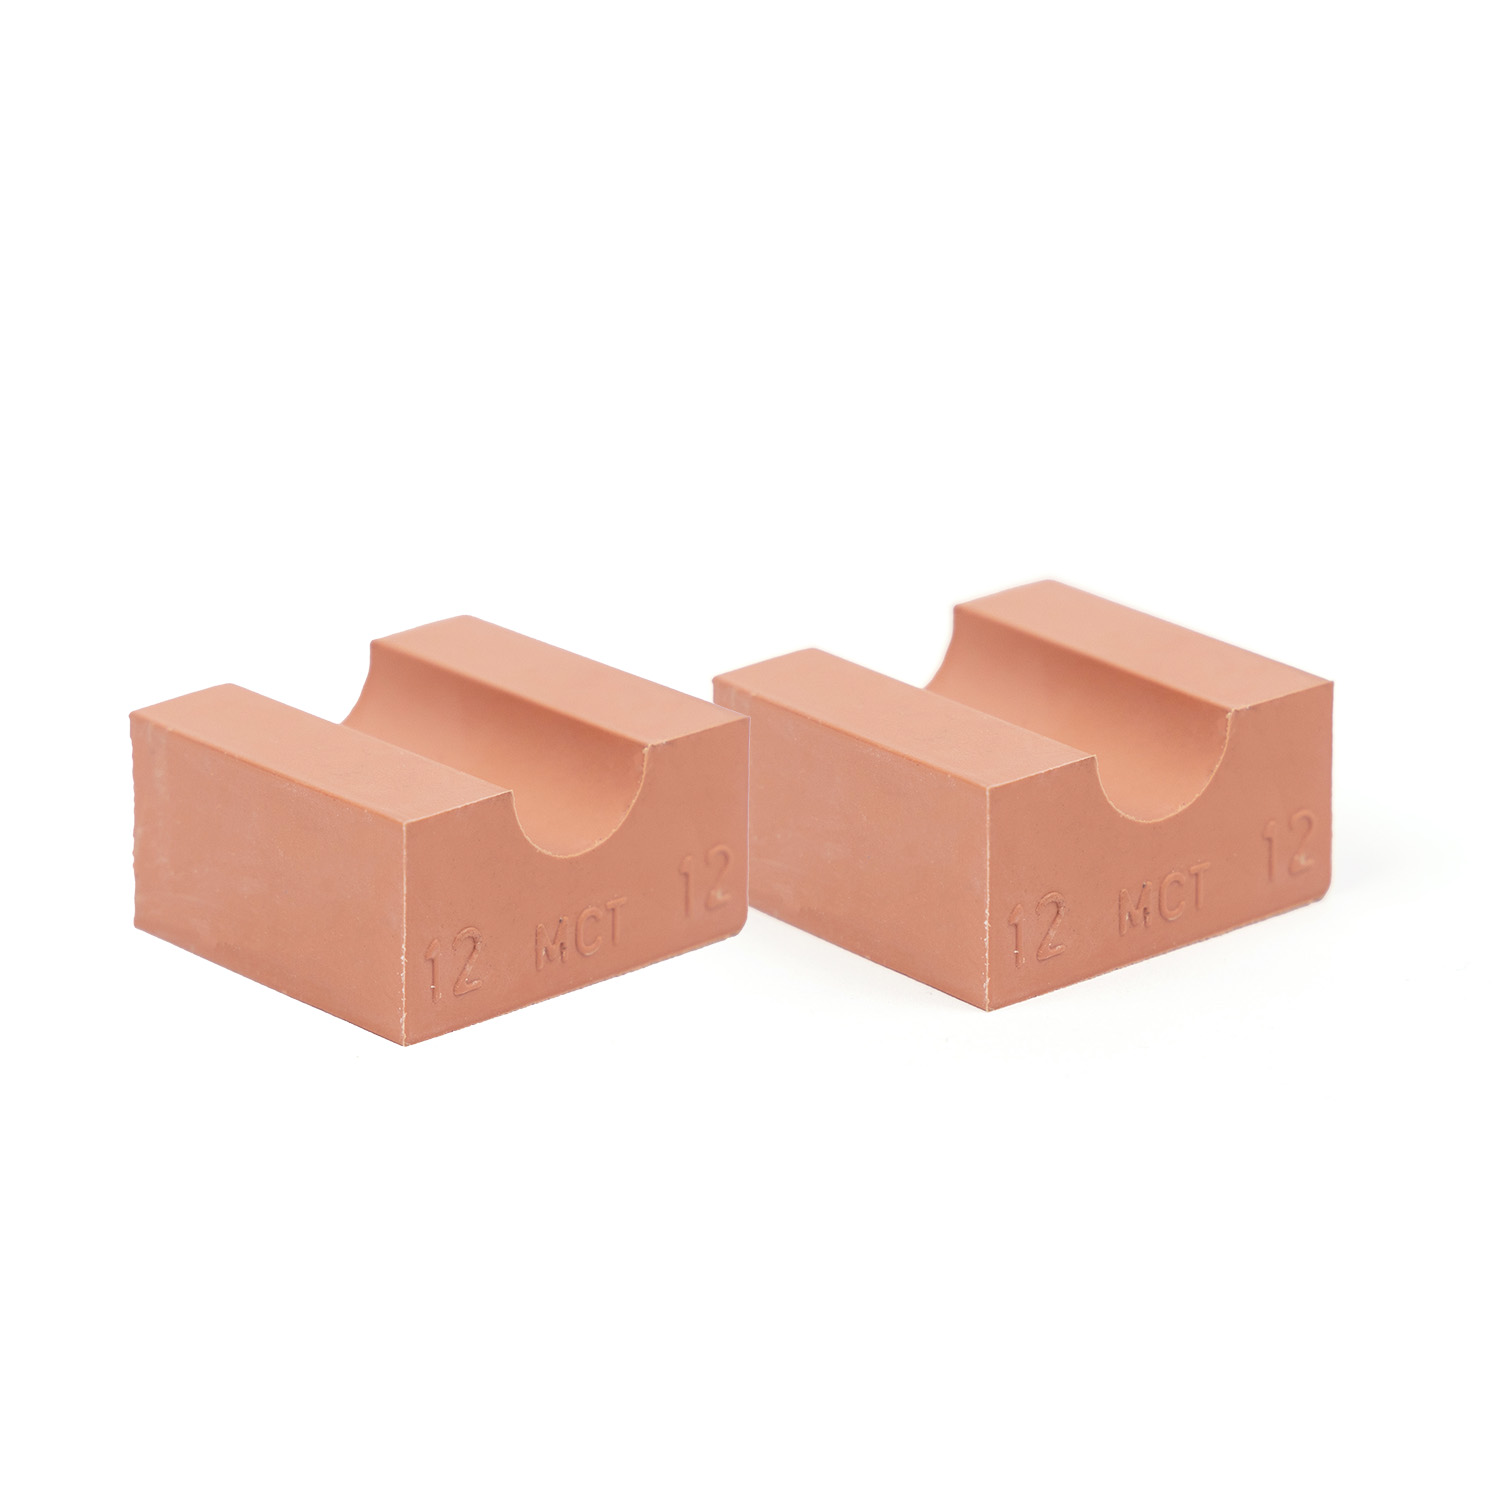 20-04 30MM*2 Set of 2 half insert block lycron 30mm, 20-04 for cable/pipe diam. 3.5-4.5mm